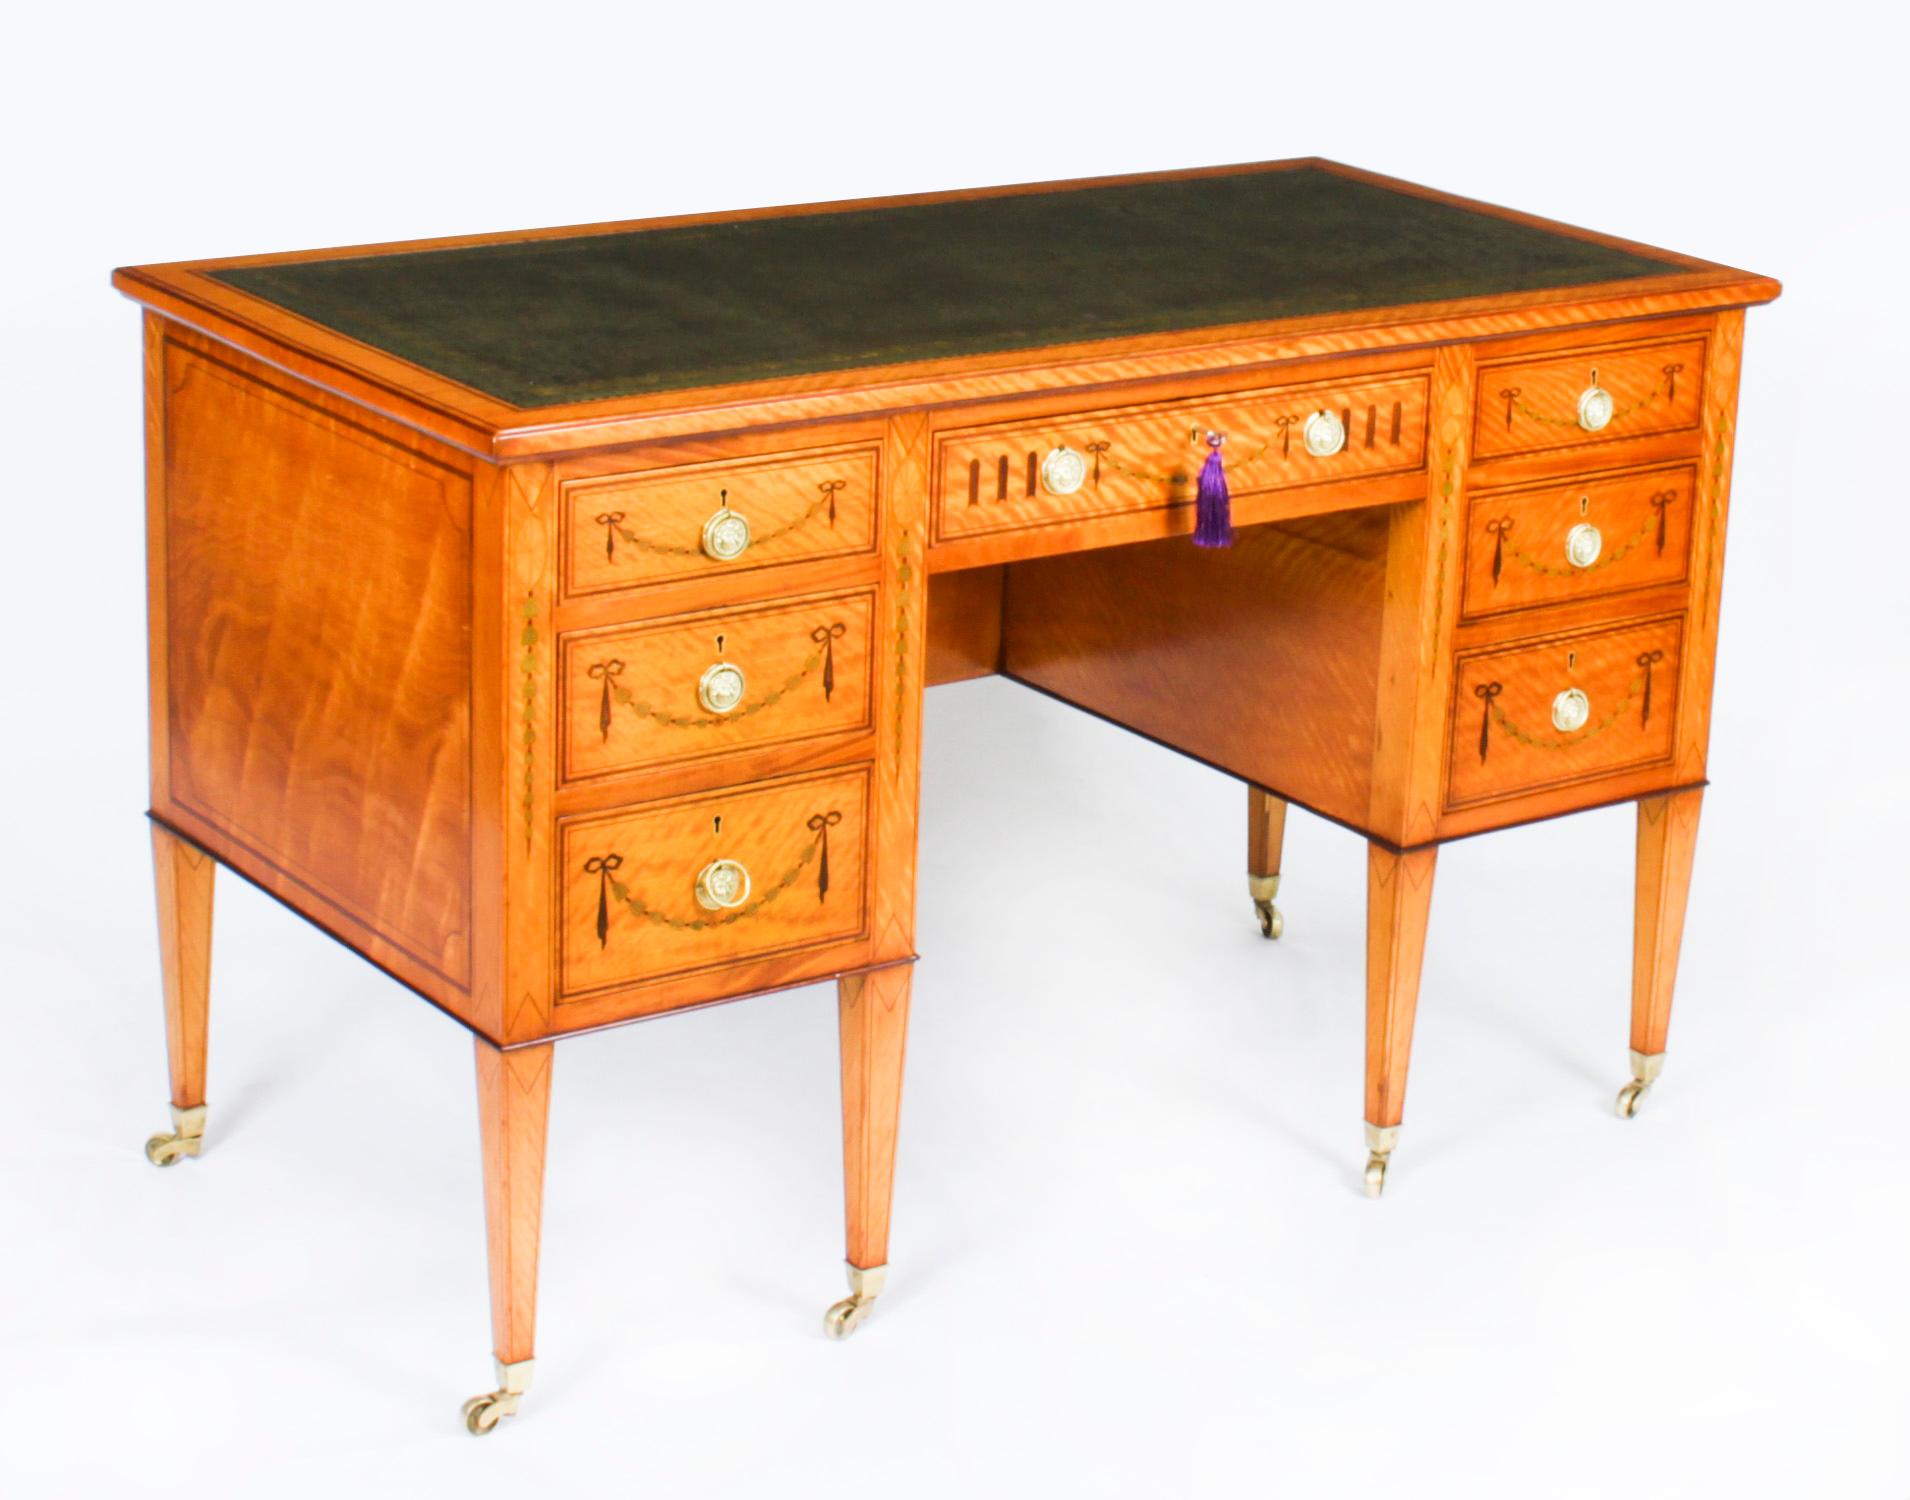 Antique Inlaid Satinwood Writing Table Desk by Edwards & Roberts, 19th Century 14